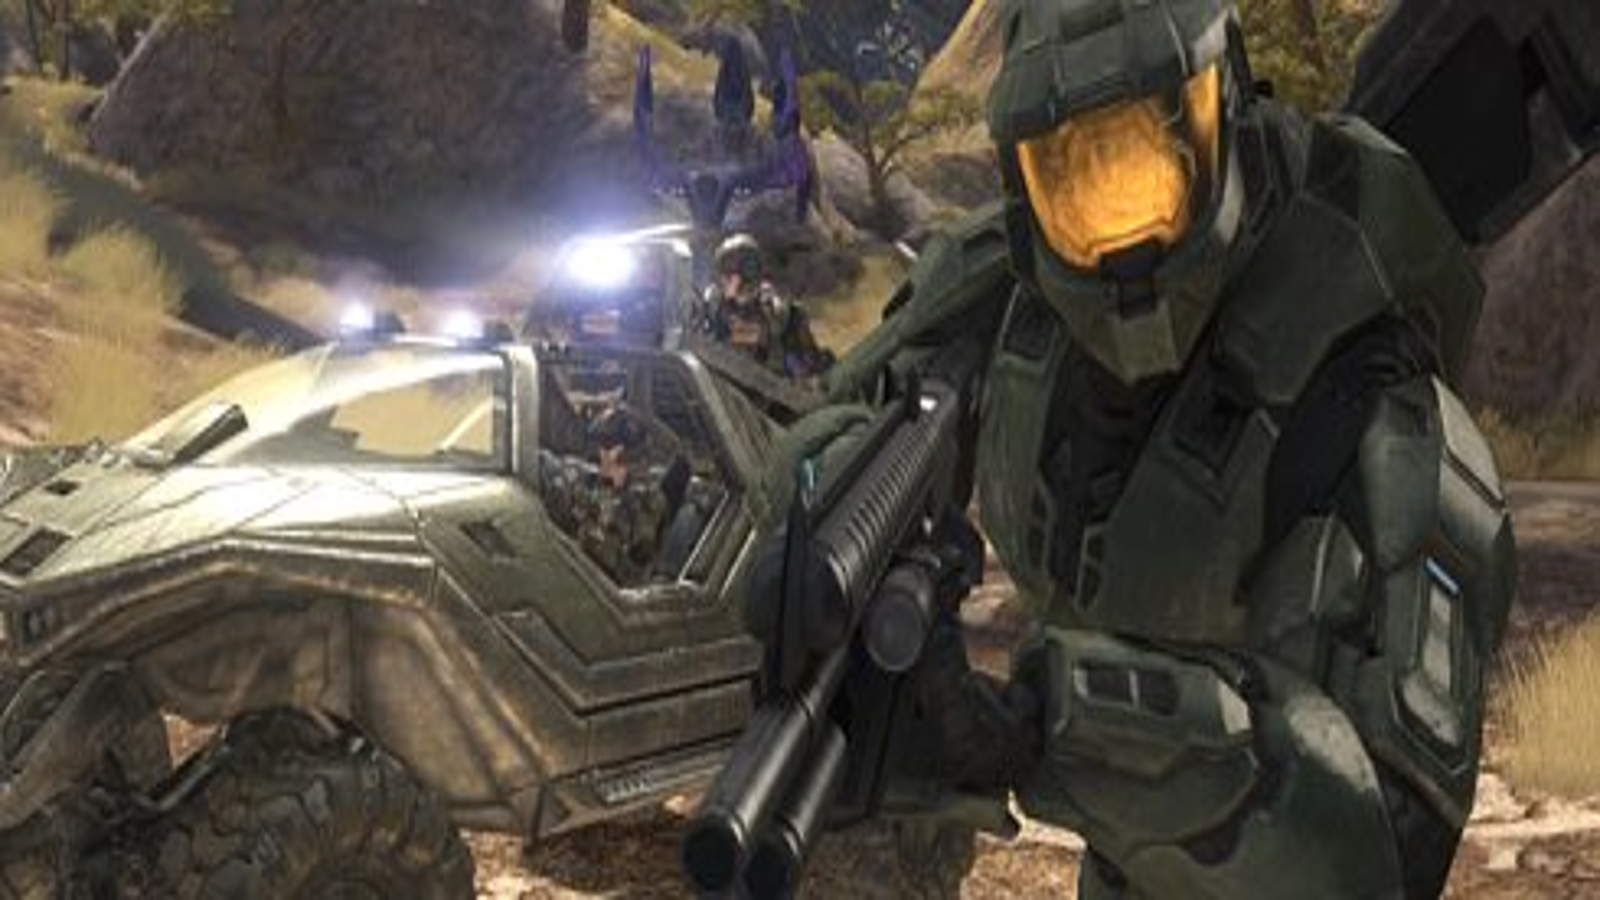 halo odst characters